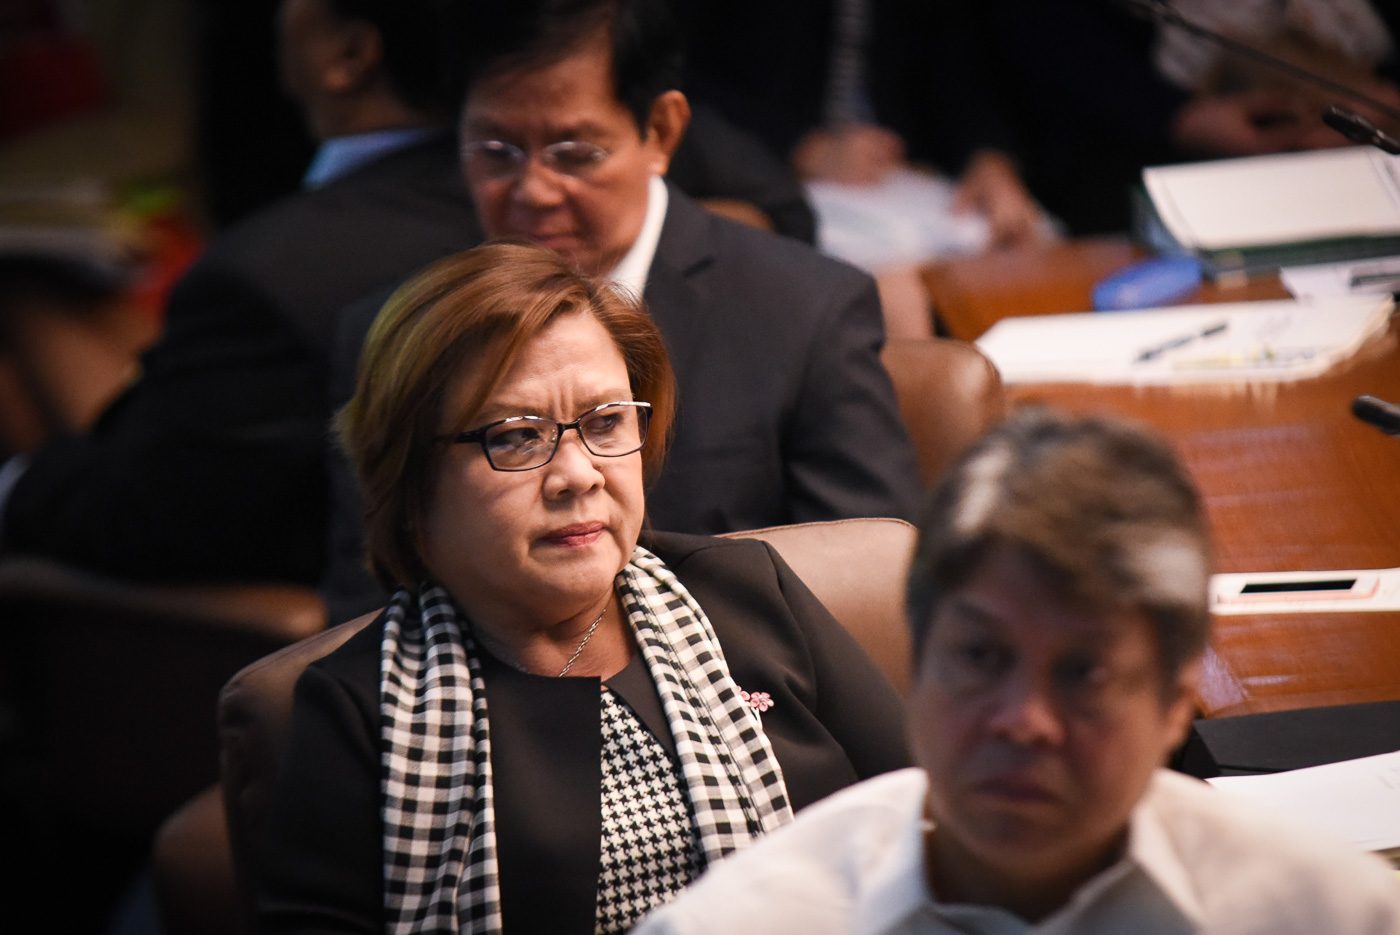 De Lima: I exposed drug use in Bilibid, why probe me?